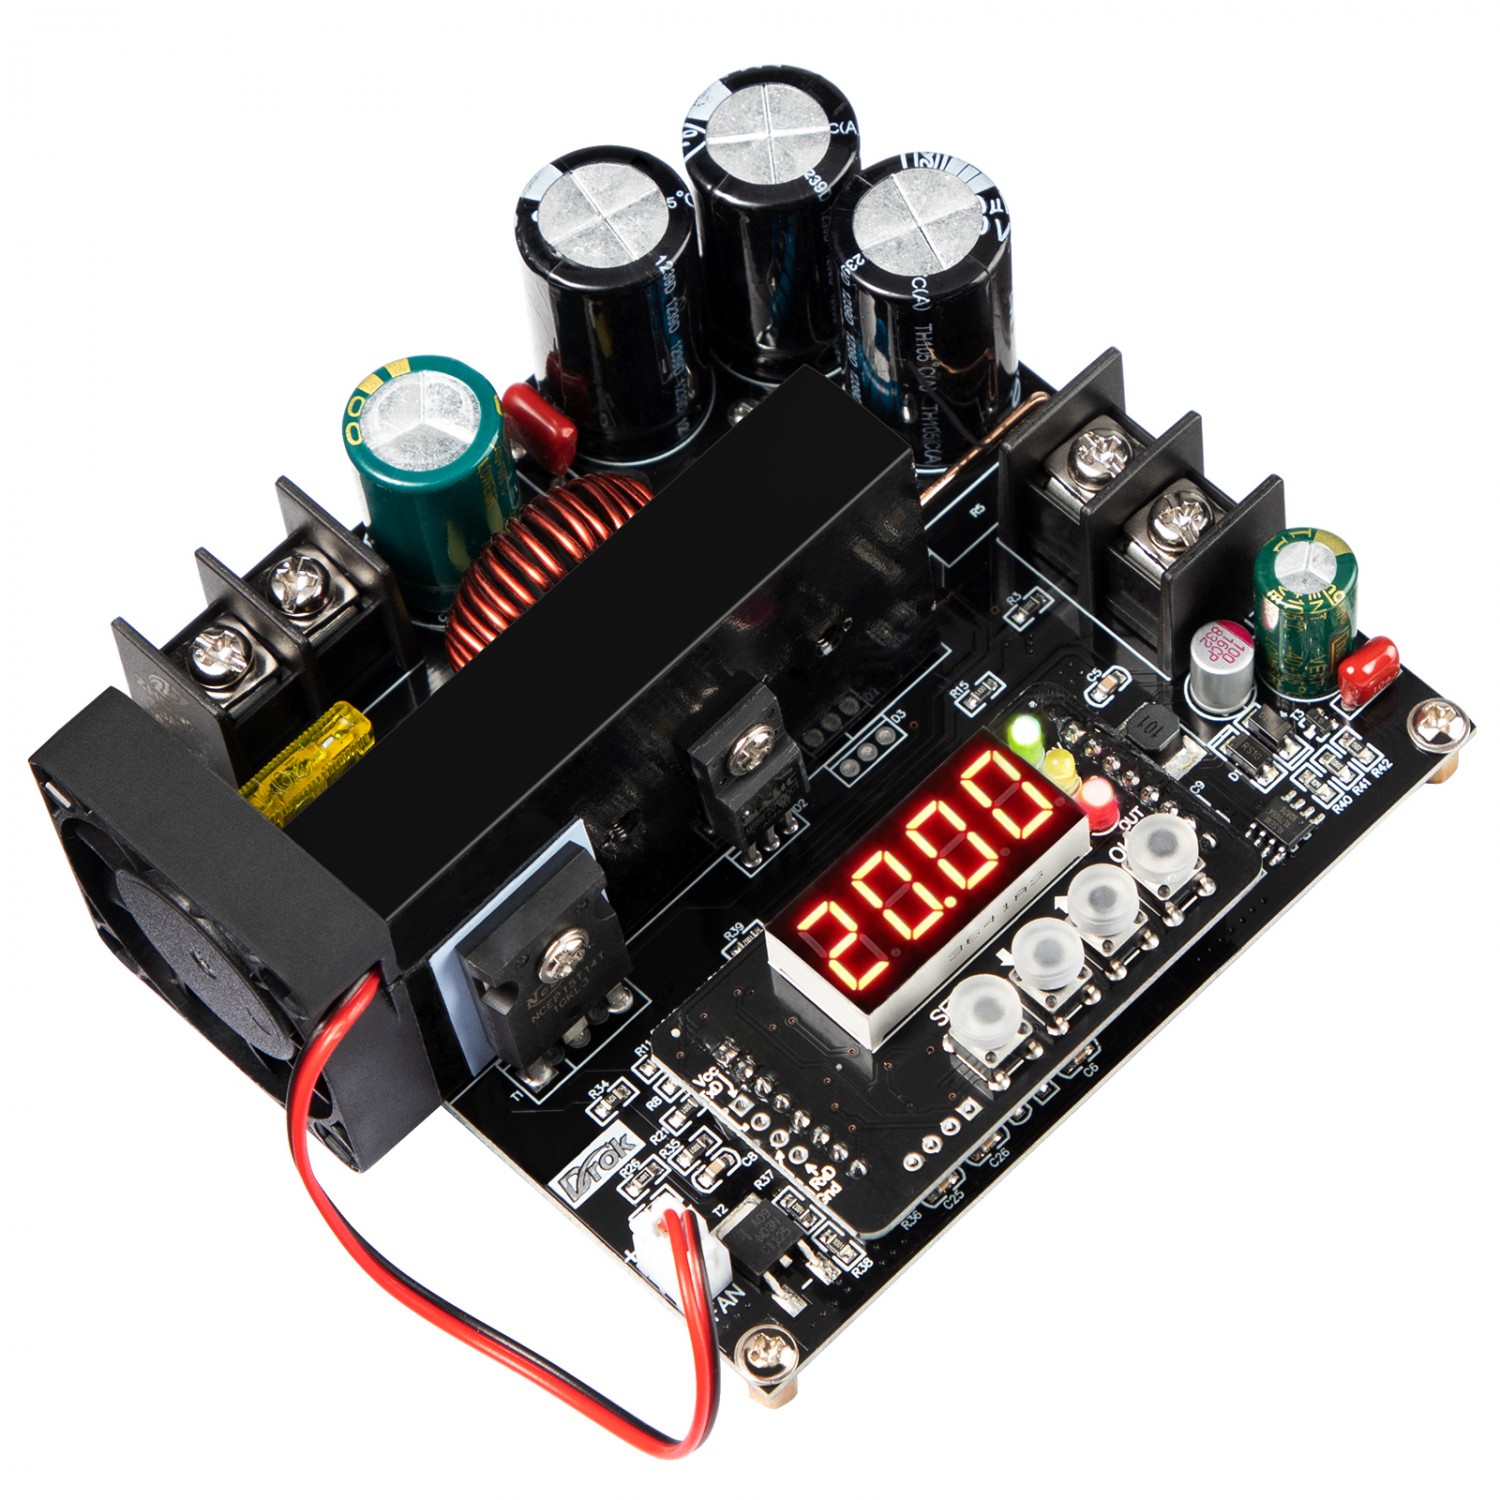 400W 15A DC-DC Power Converter Boost Module Step-up Constant Power